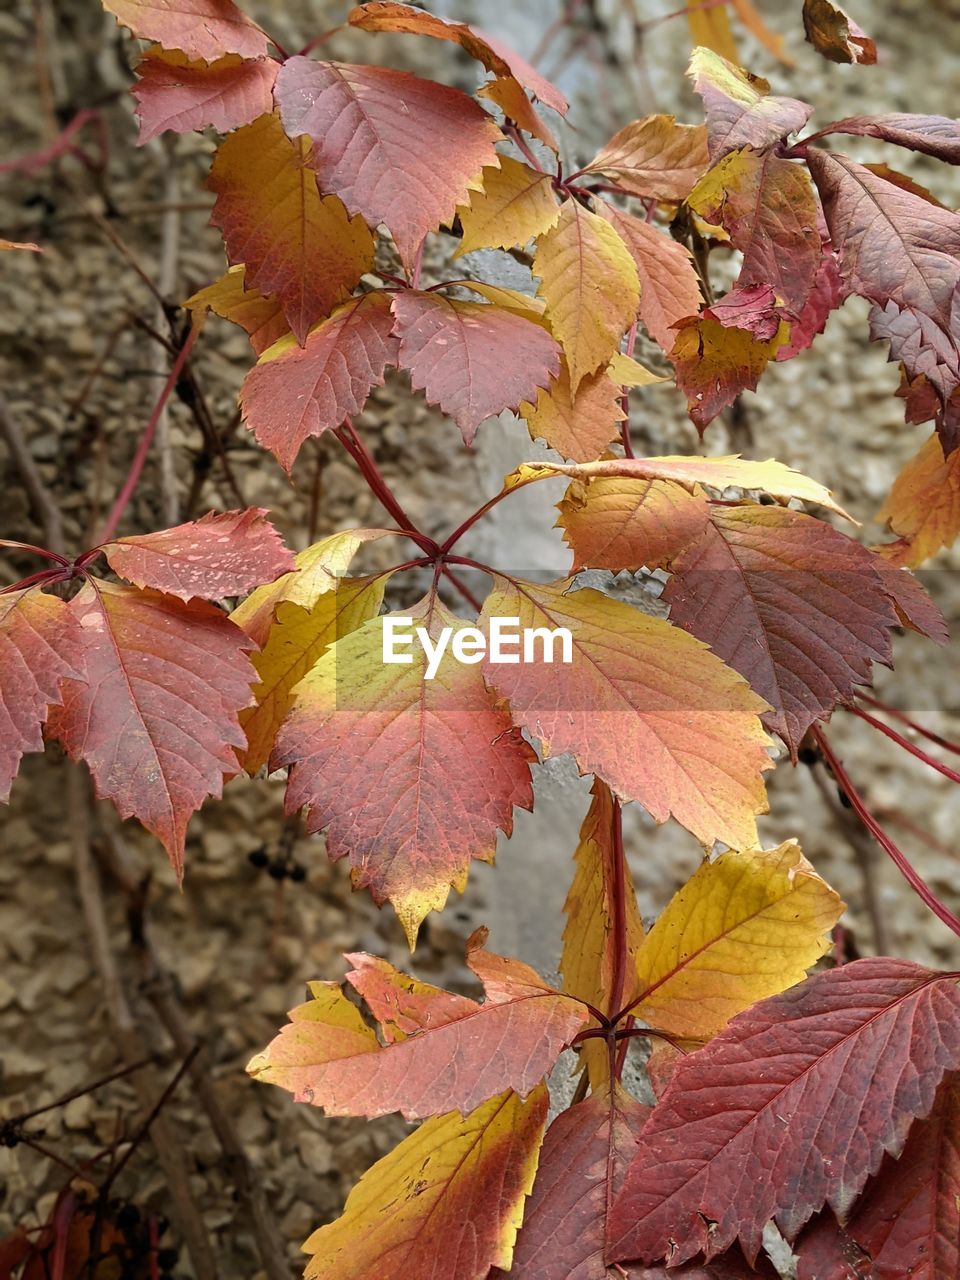 CLOSE-UP OF AUTUMNAL LEAVES